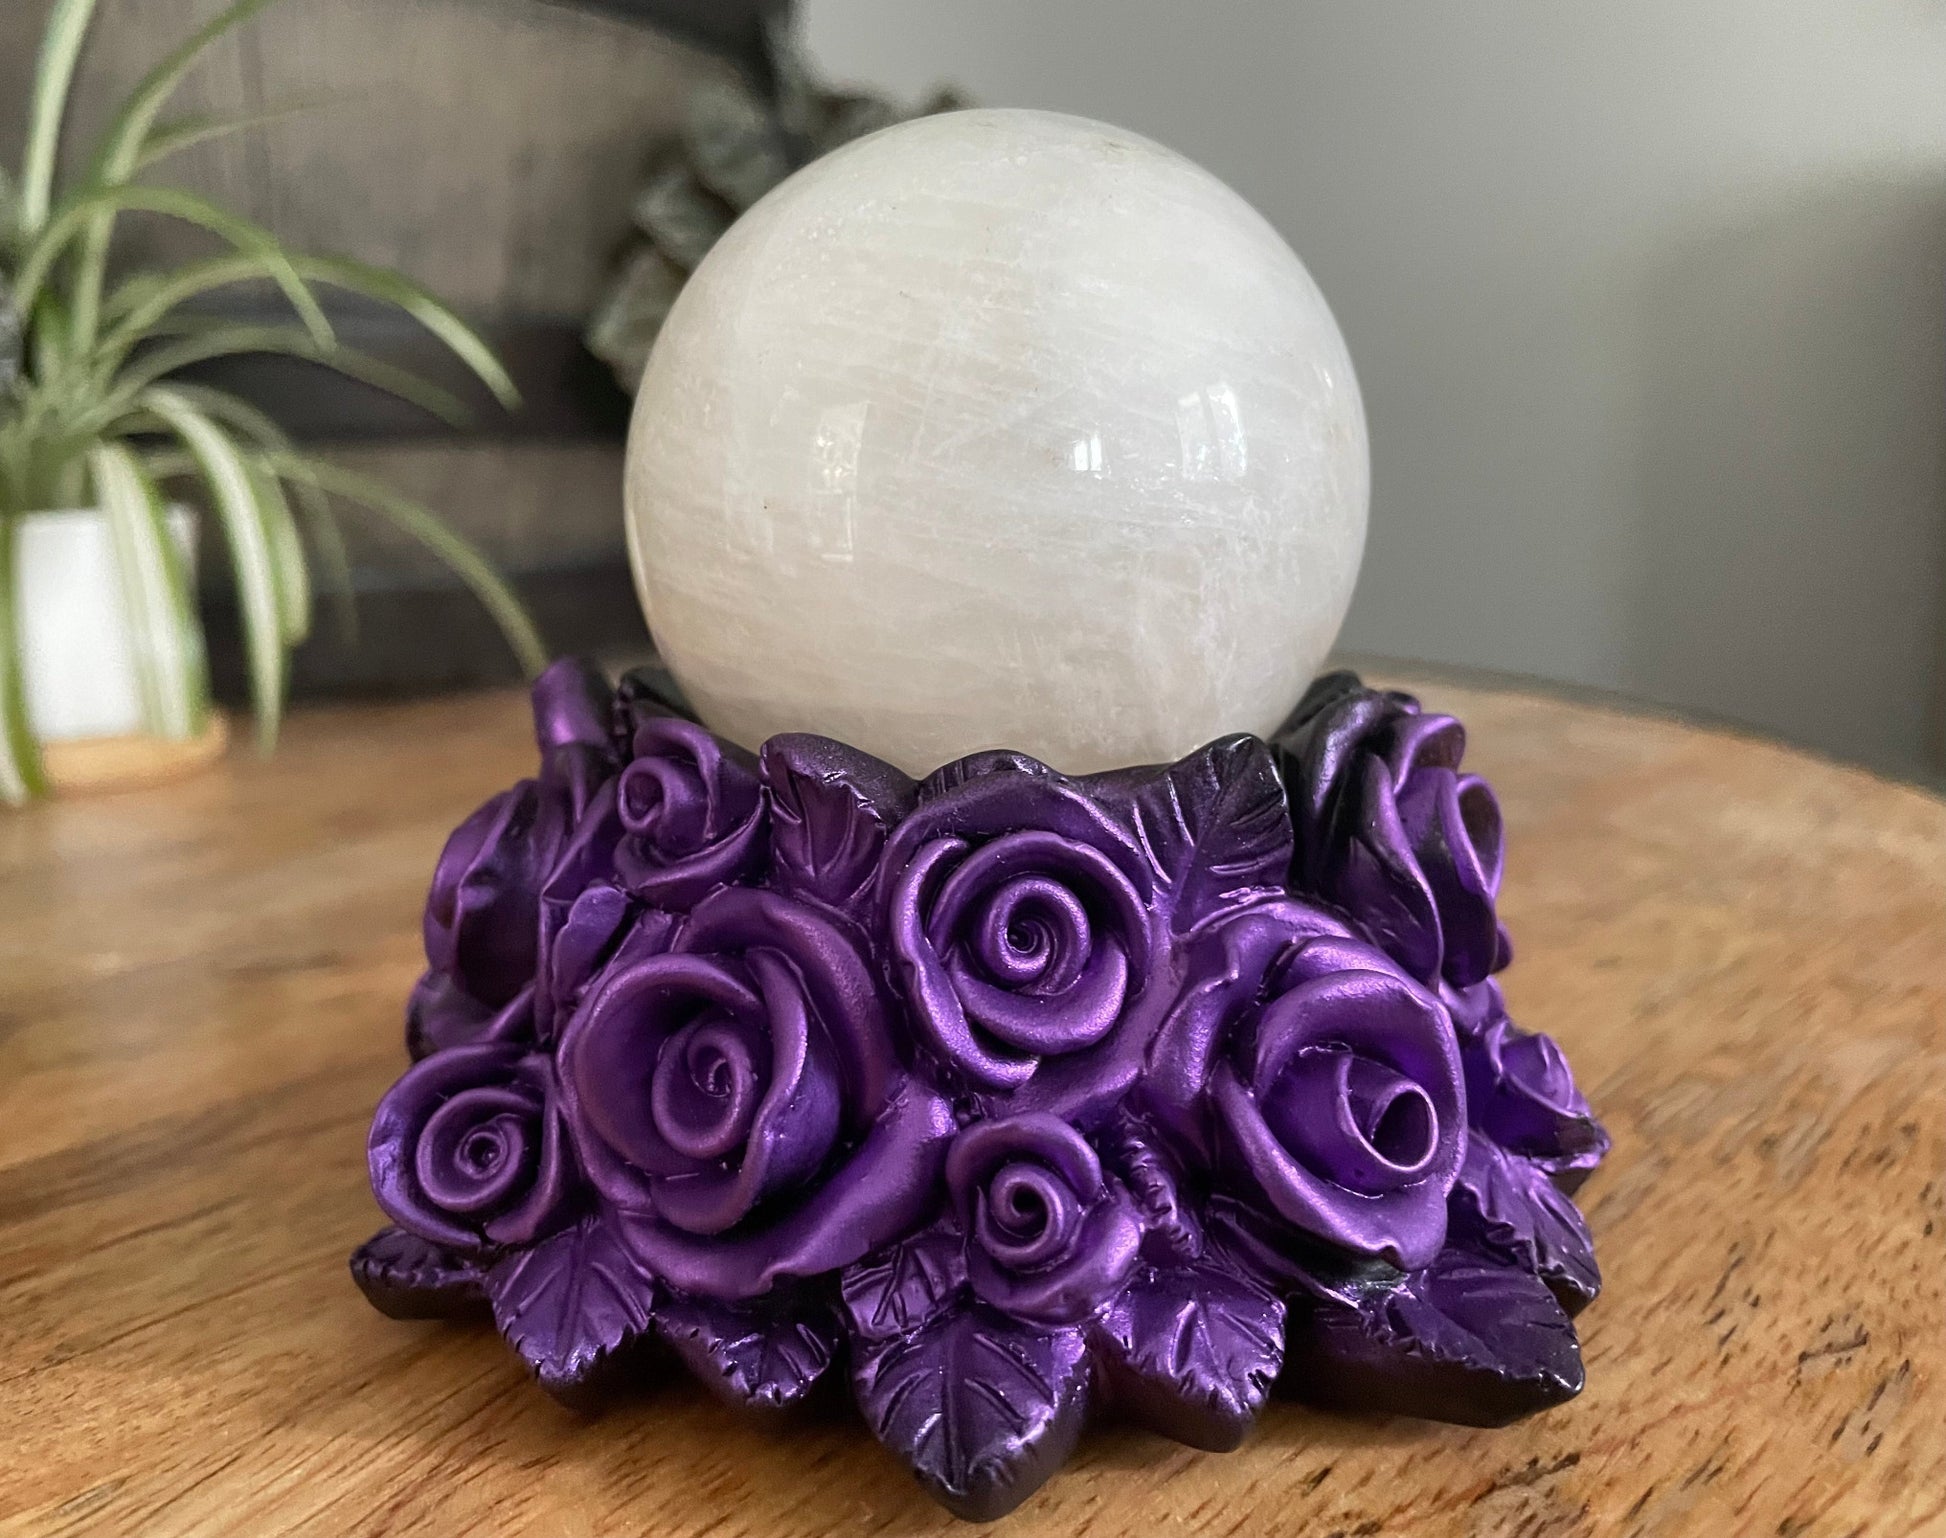 Pictured is a sphere stand in the shape of a bed of purple roses.